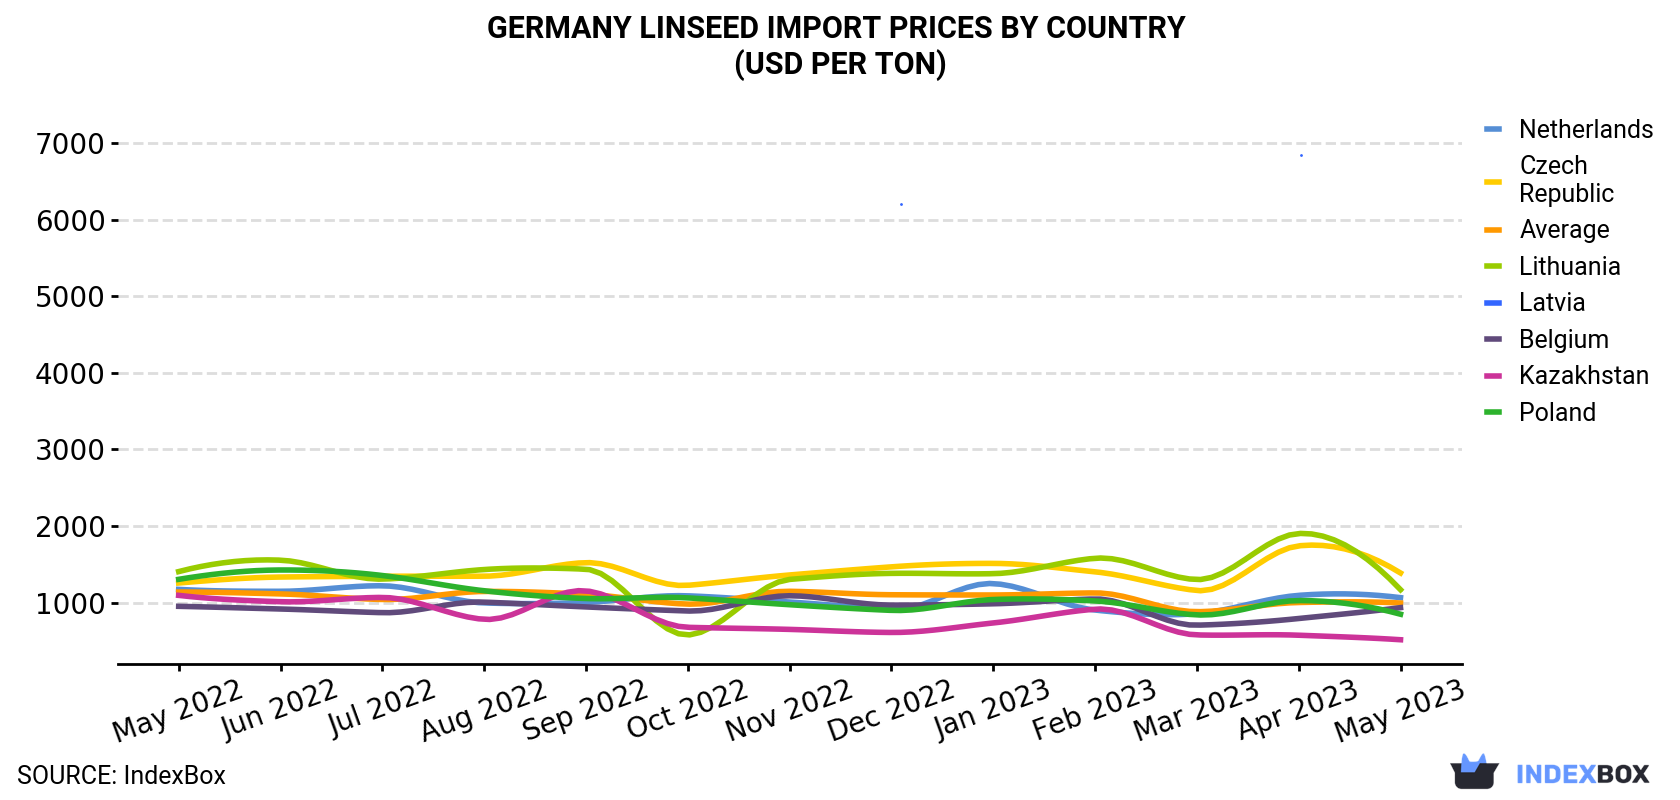 Germany Linseed Import Prices By Country (USD Per Ton)